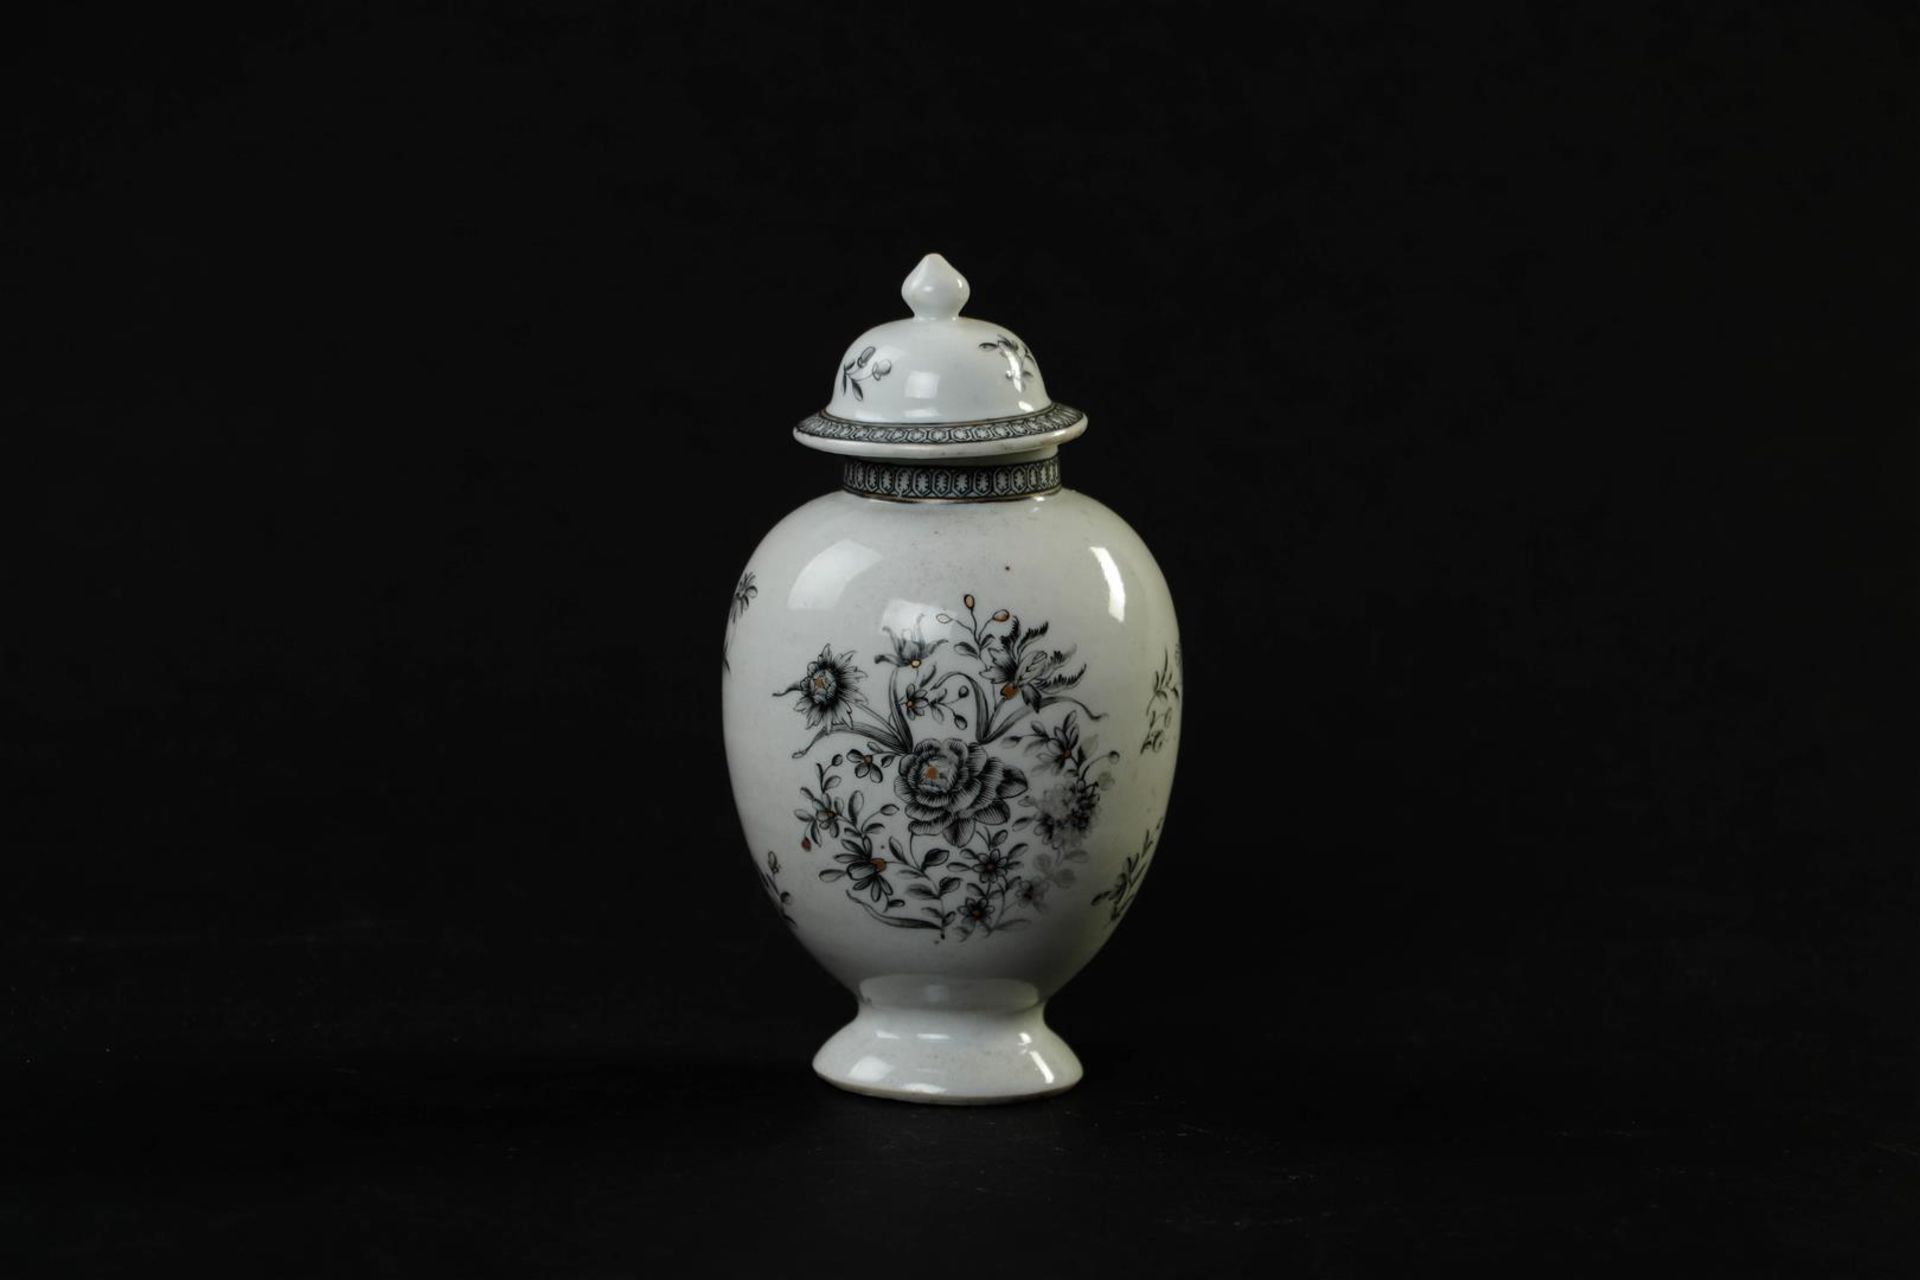 An Encre de Chine tableware set consisting of a teapot, milk jug, tea caddy, patty pan and spoon tra - Image 16 of 24